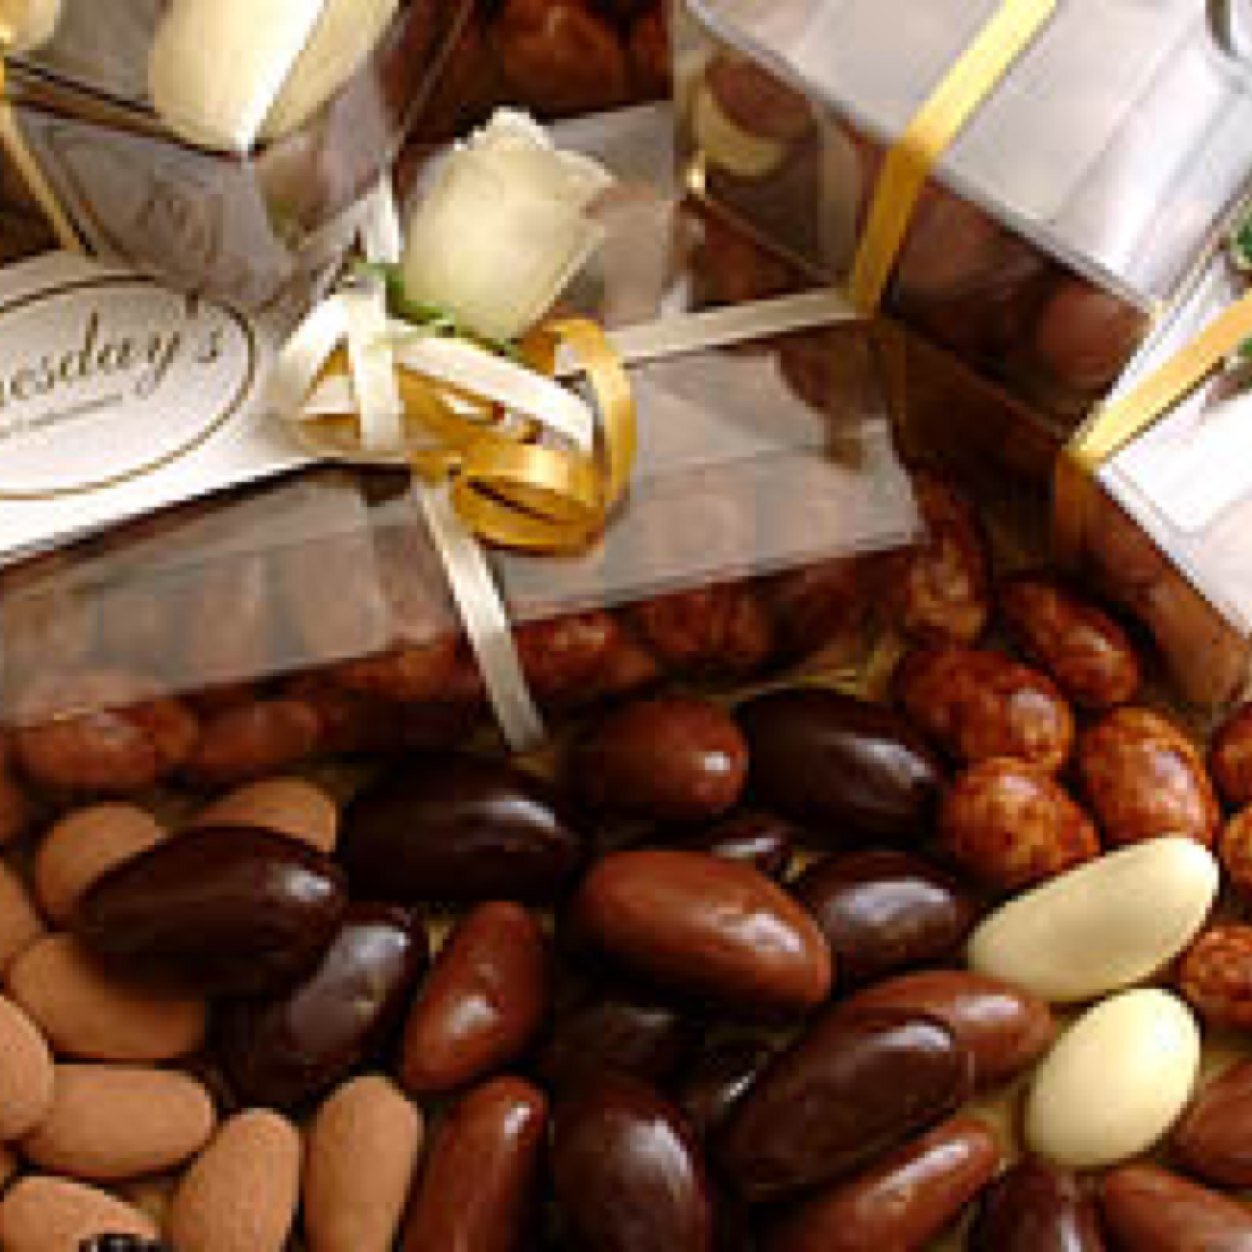 The finest confectionery from around the world brought together here, if its chocolate, fudge, Turkish delight or nougat you want, you're in the right place.